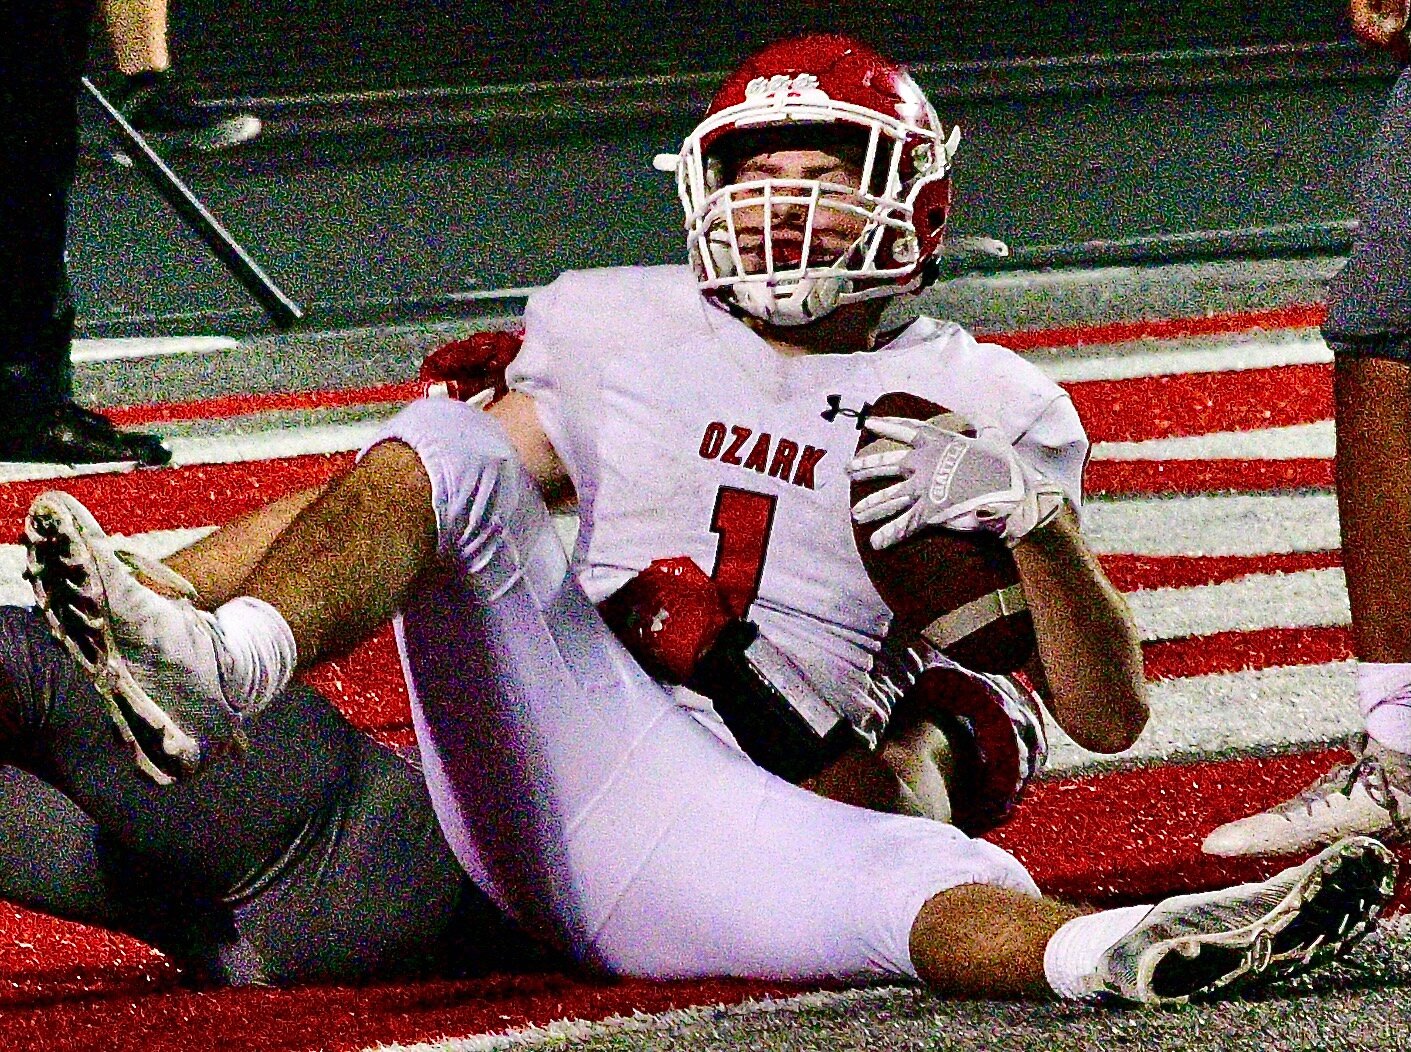 OZARK'S KYLE FITZPATRICK lands in the end zone for a 15-yard touchdown.